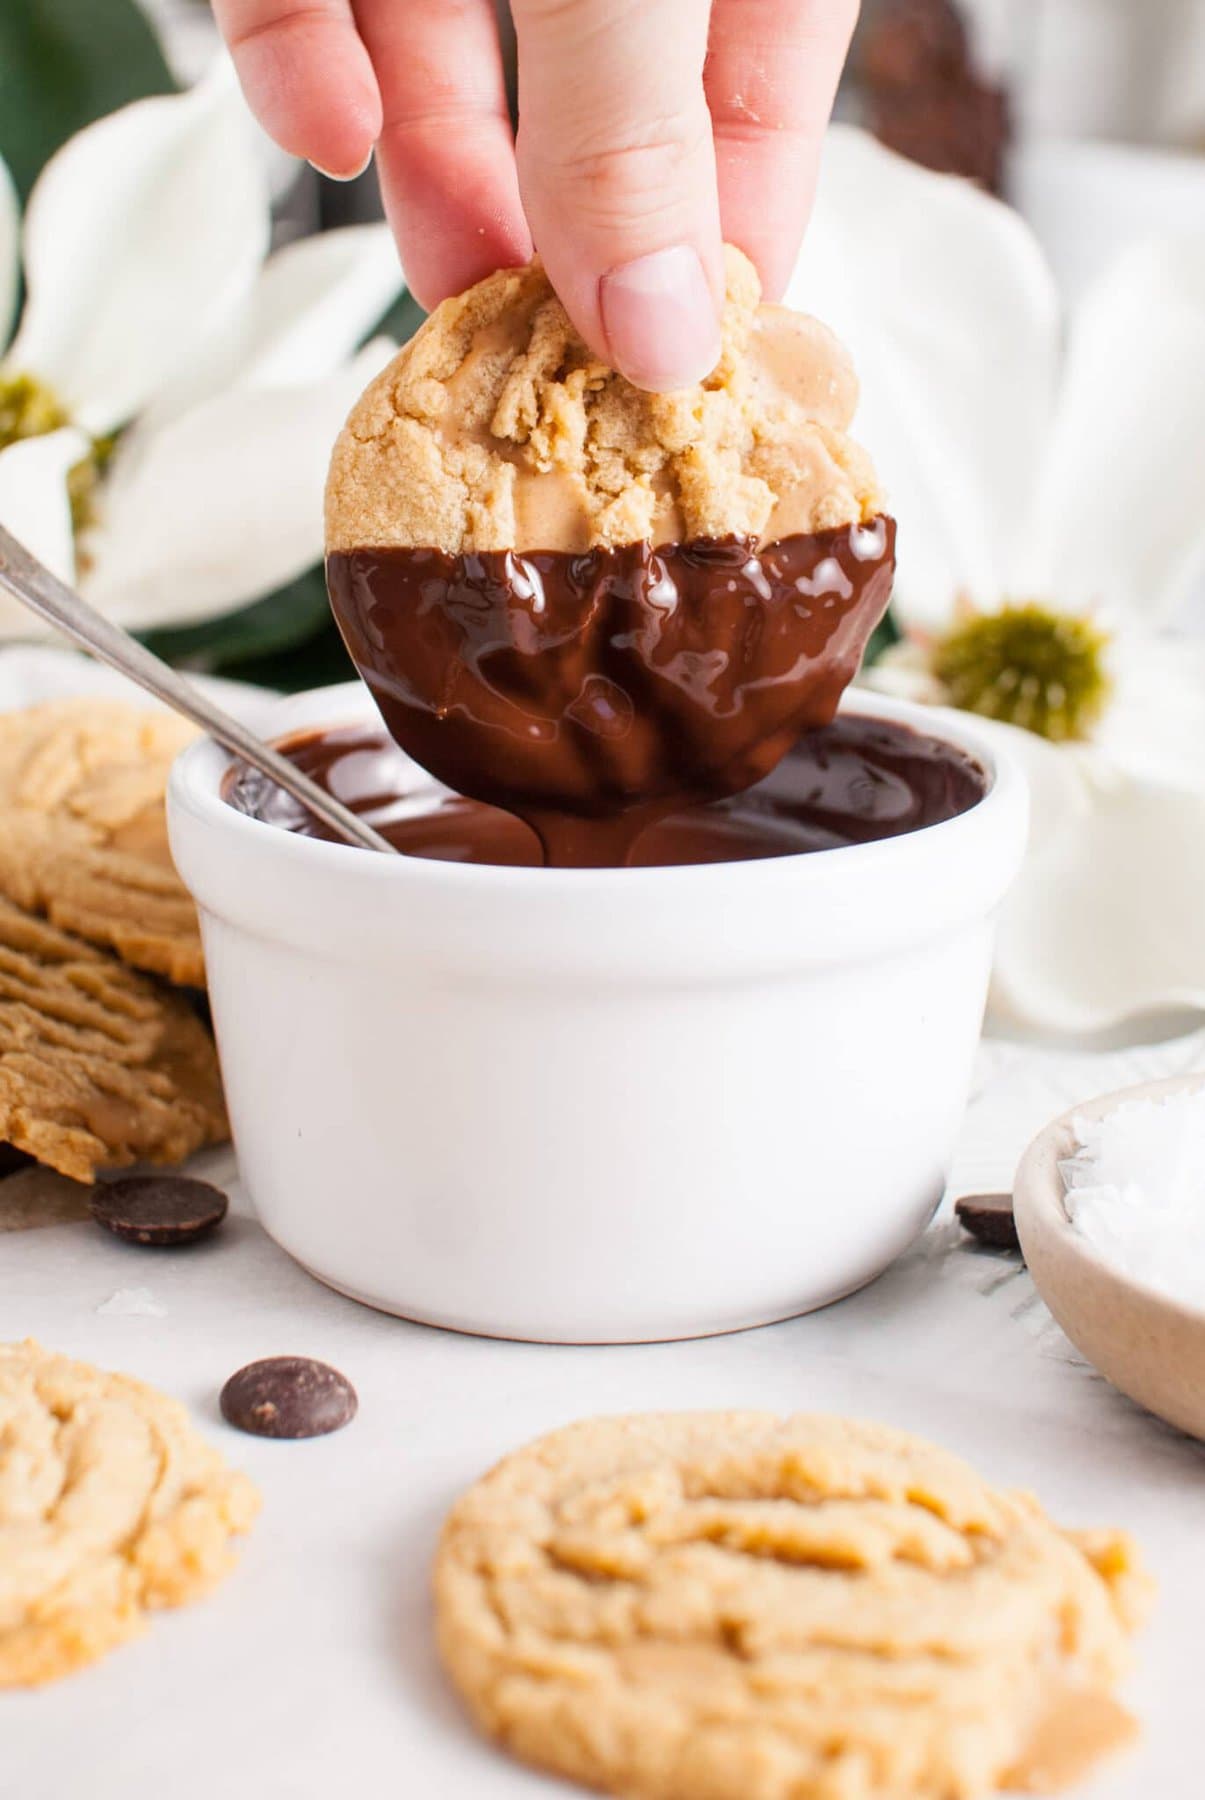 Dipping the cookies into the chocolate.